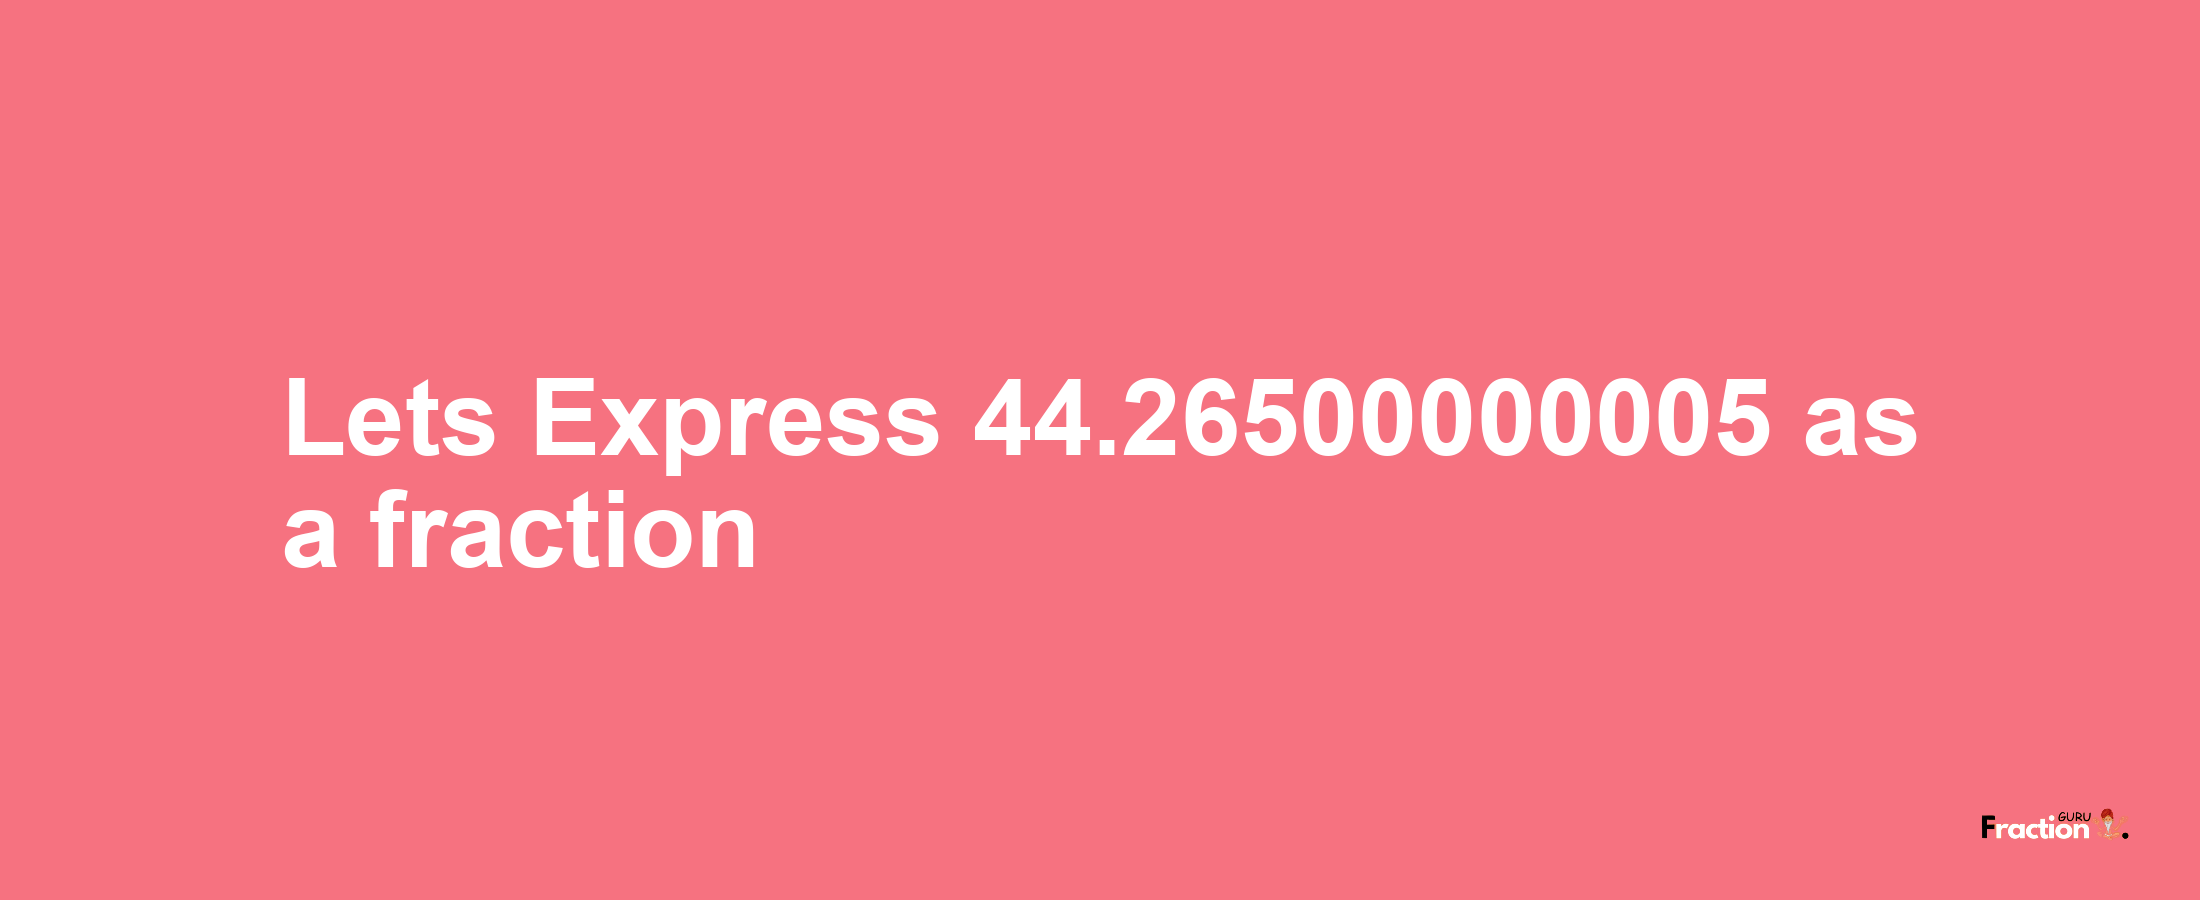 Lets Express 44.26500000005 as afraction